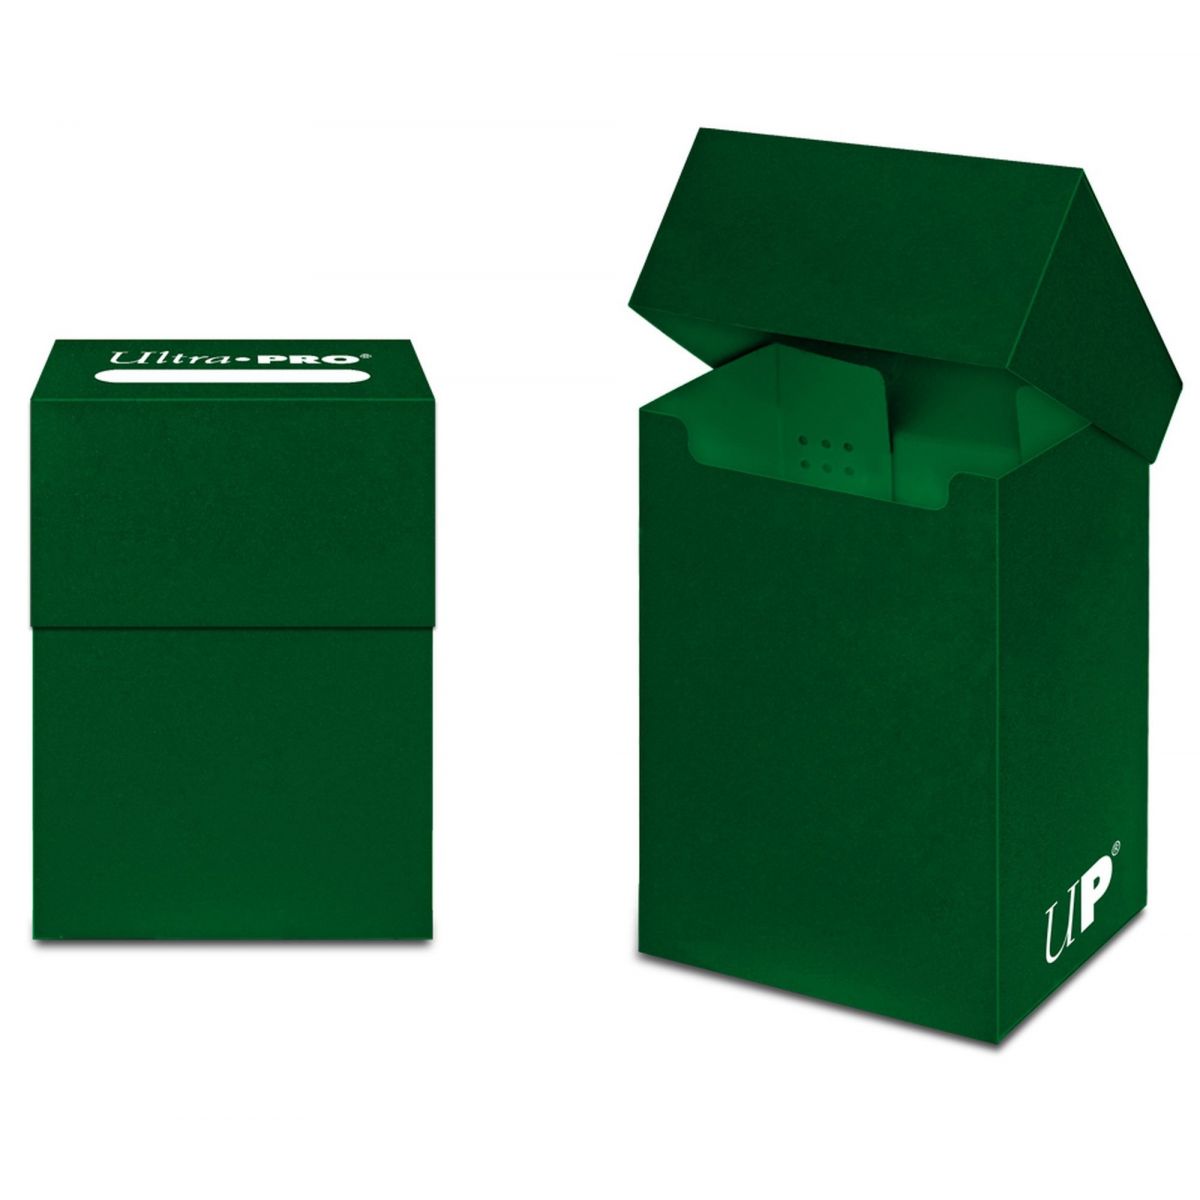 Ultra Pro - Deck Box Solid - Vert Foret - Green Forest 80+